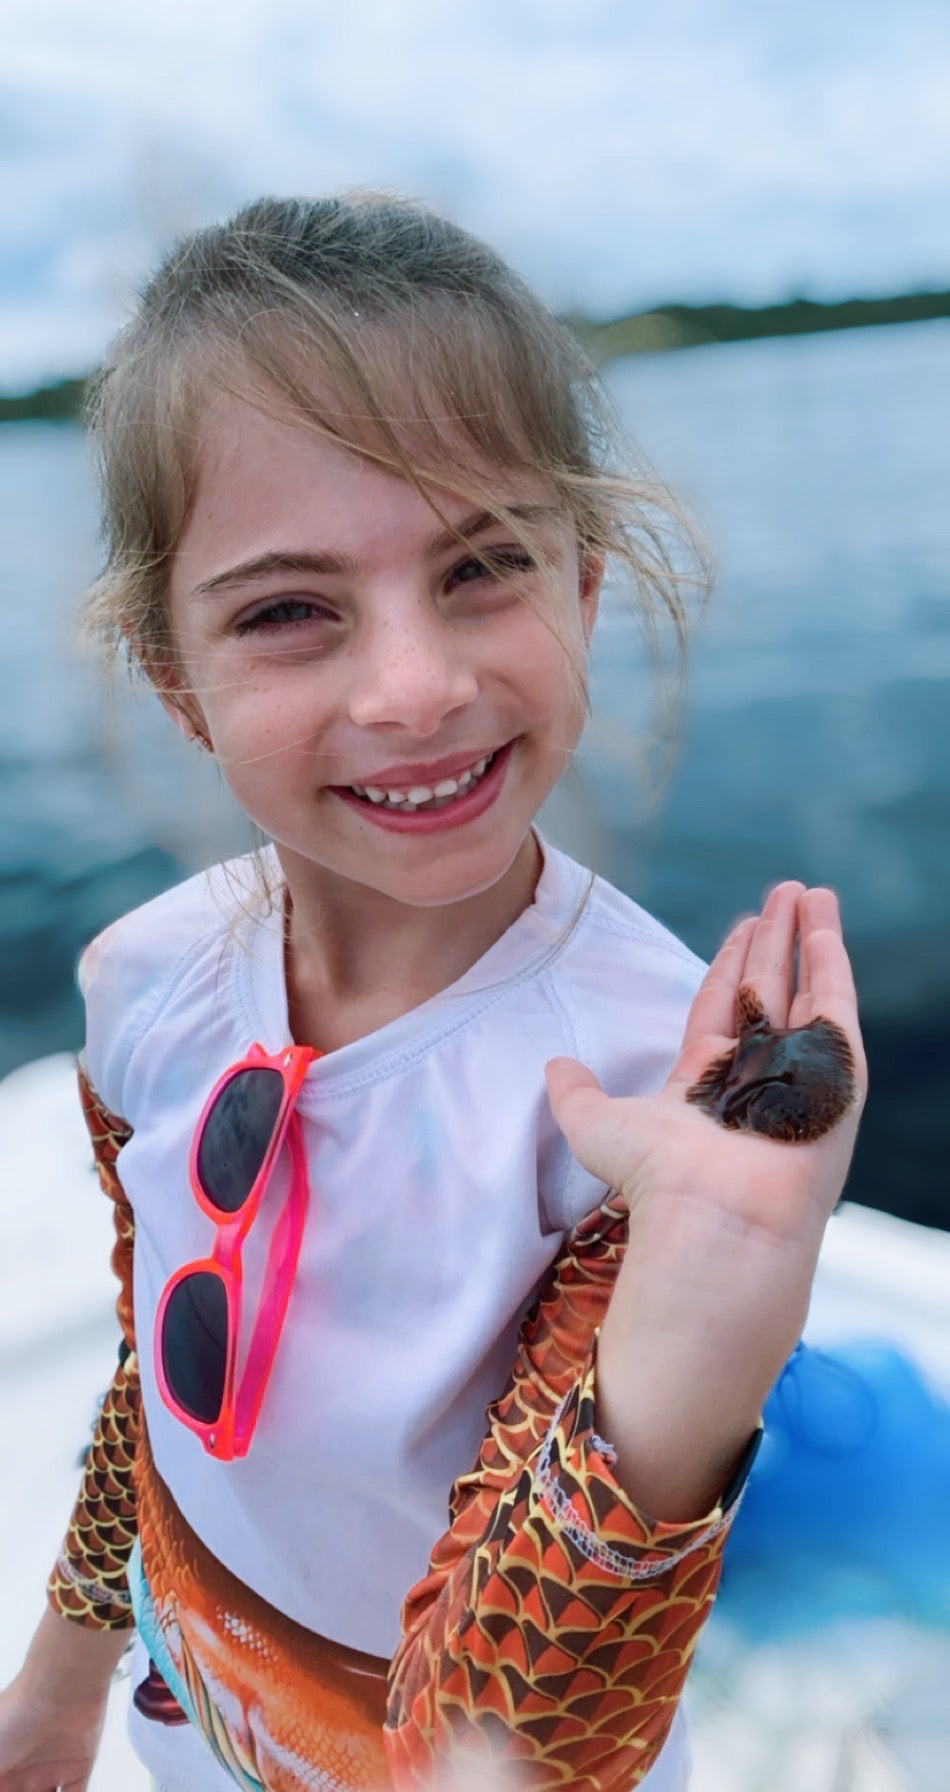 little girl holding a flounder fish. Little girl on a boat in the St. John's River in Palatka, Florida holding a flounder.